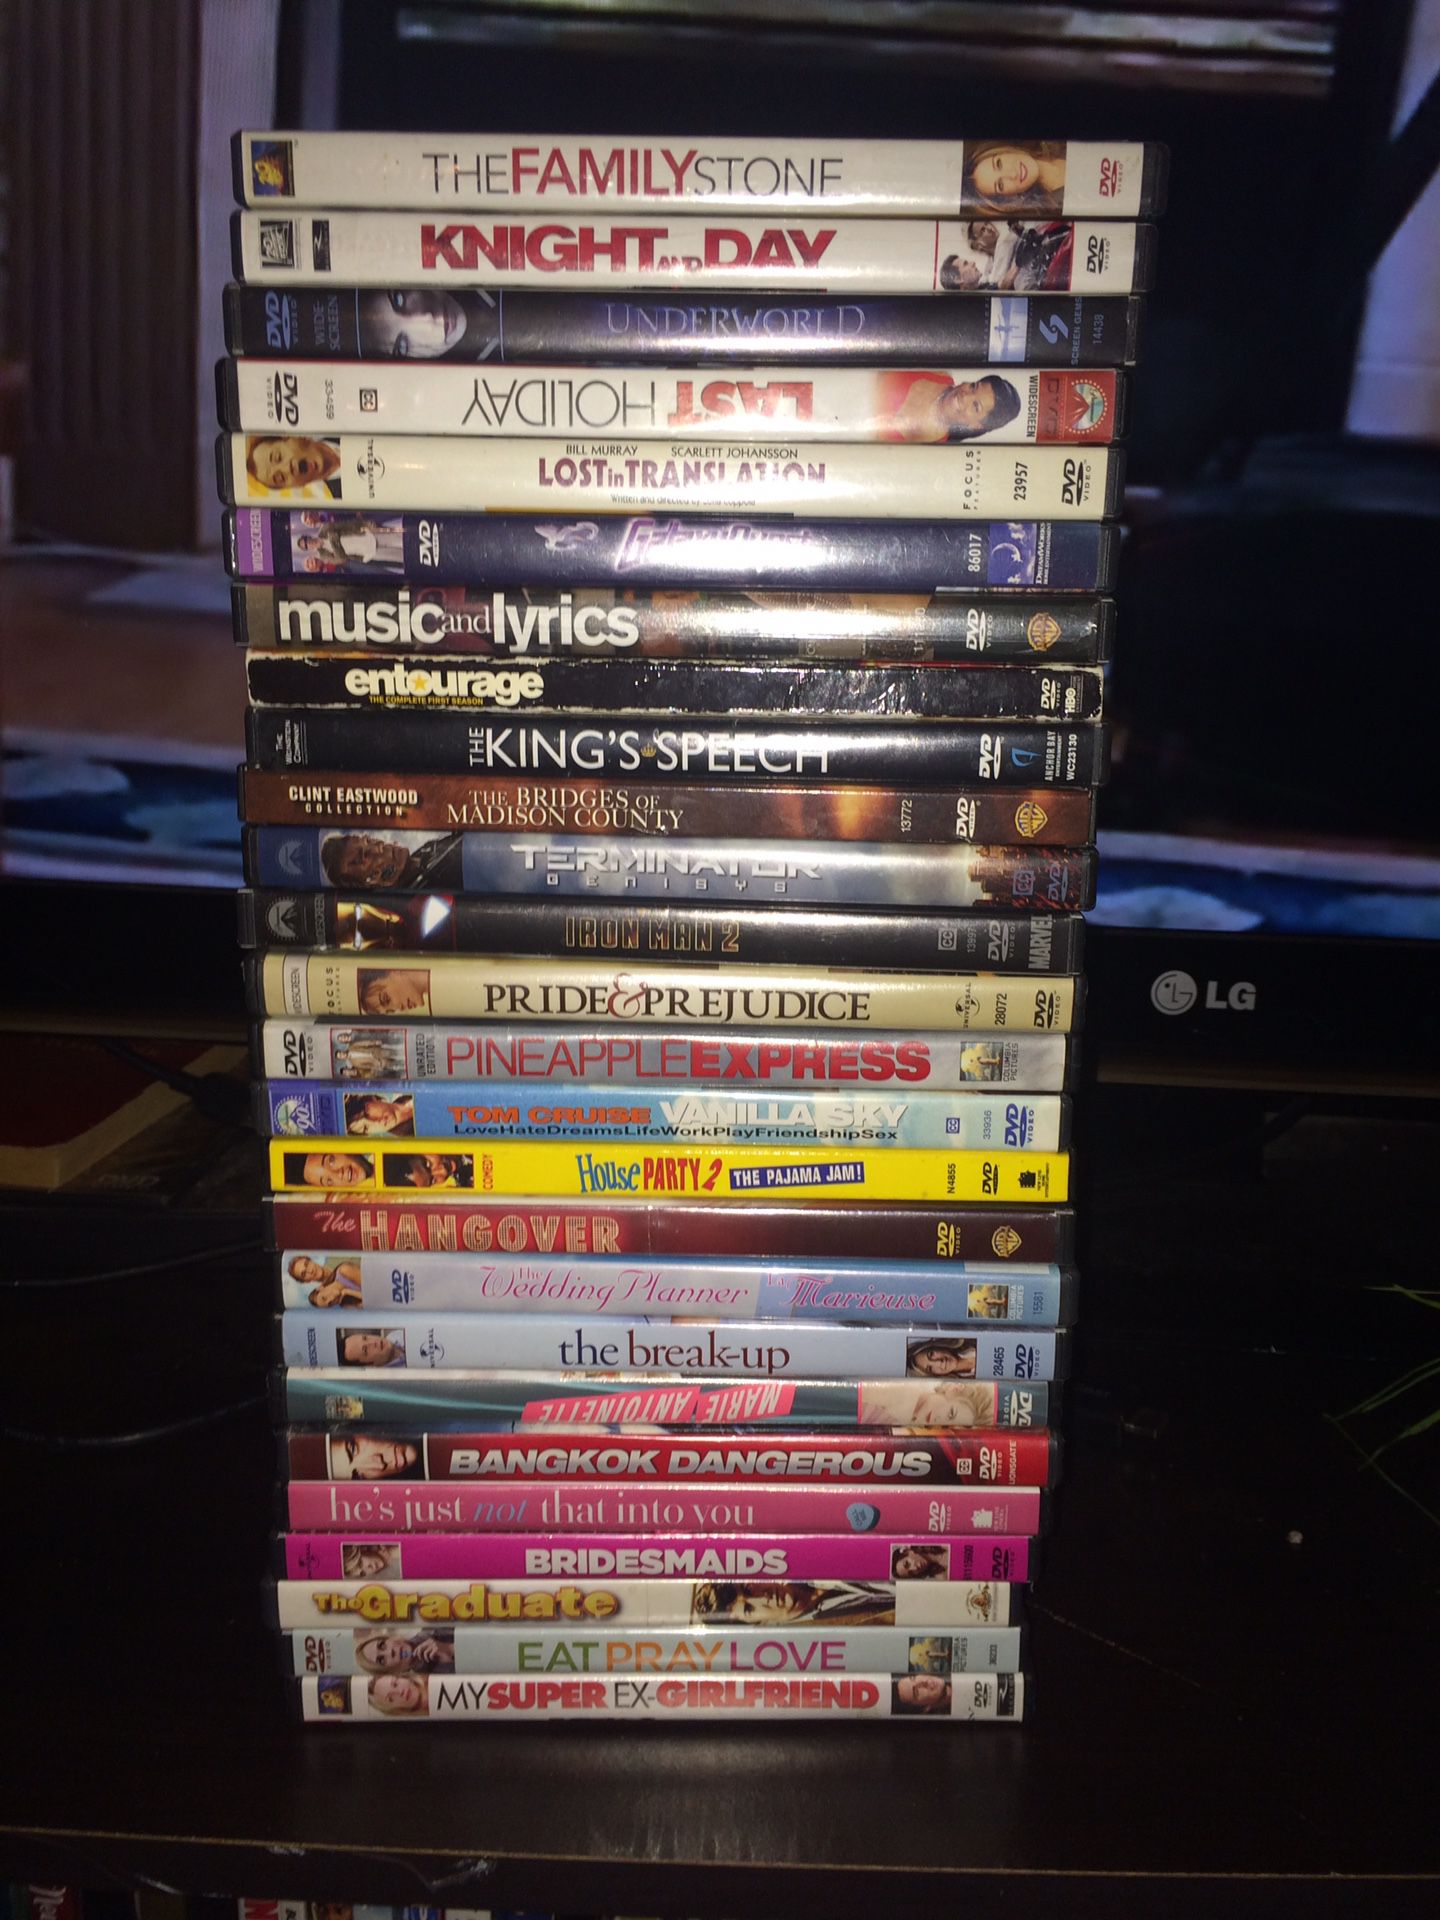 Make Offer! A whole lotta lot of DVD’s!